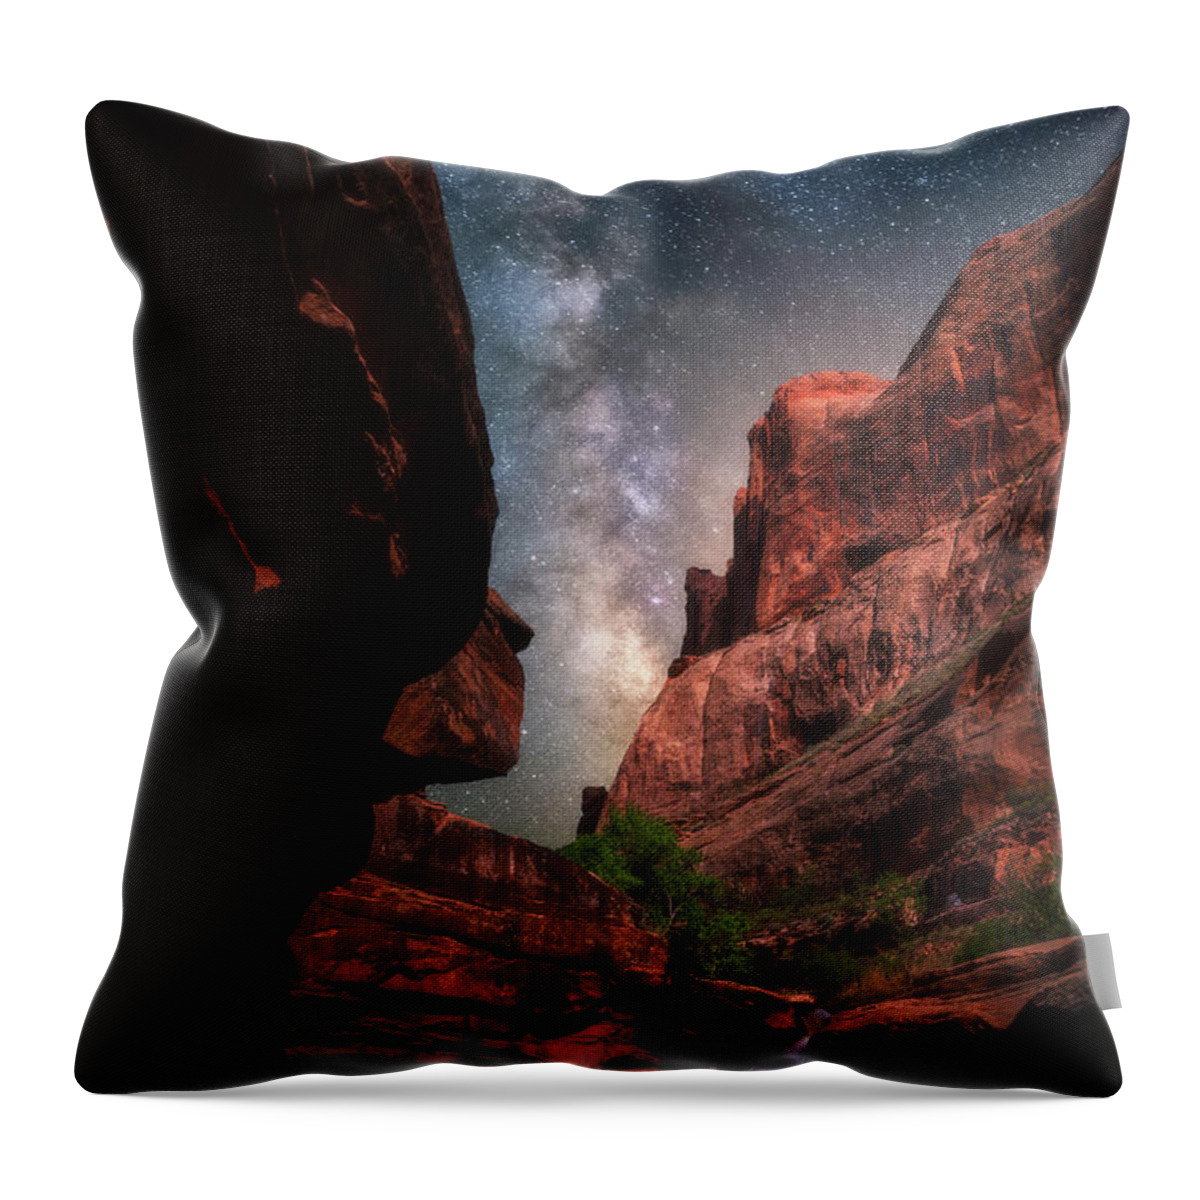 Milky Way Throw Pillow featuring the photograph Mill Creek Milky Way by Darren White